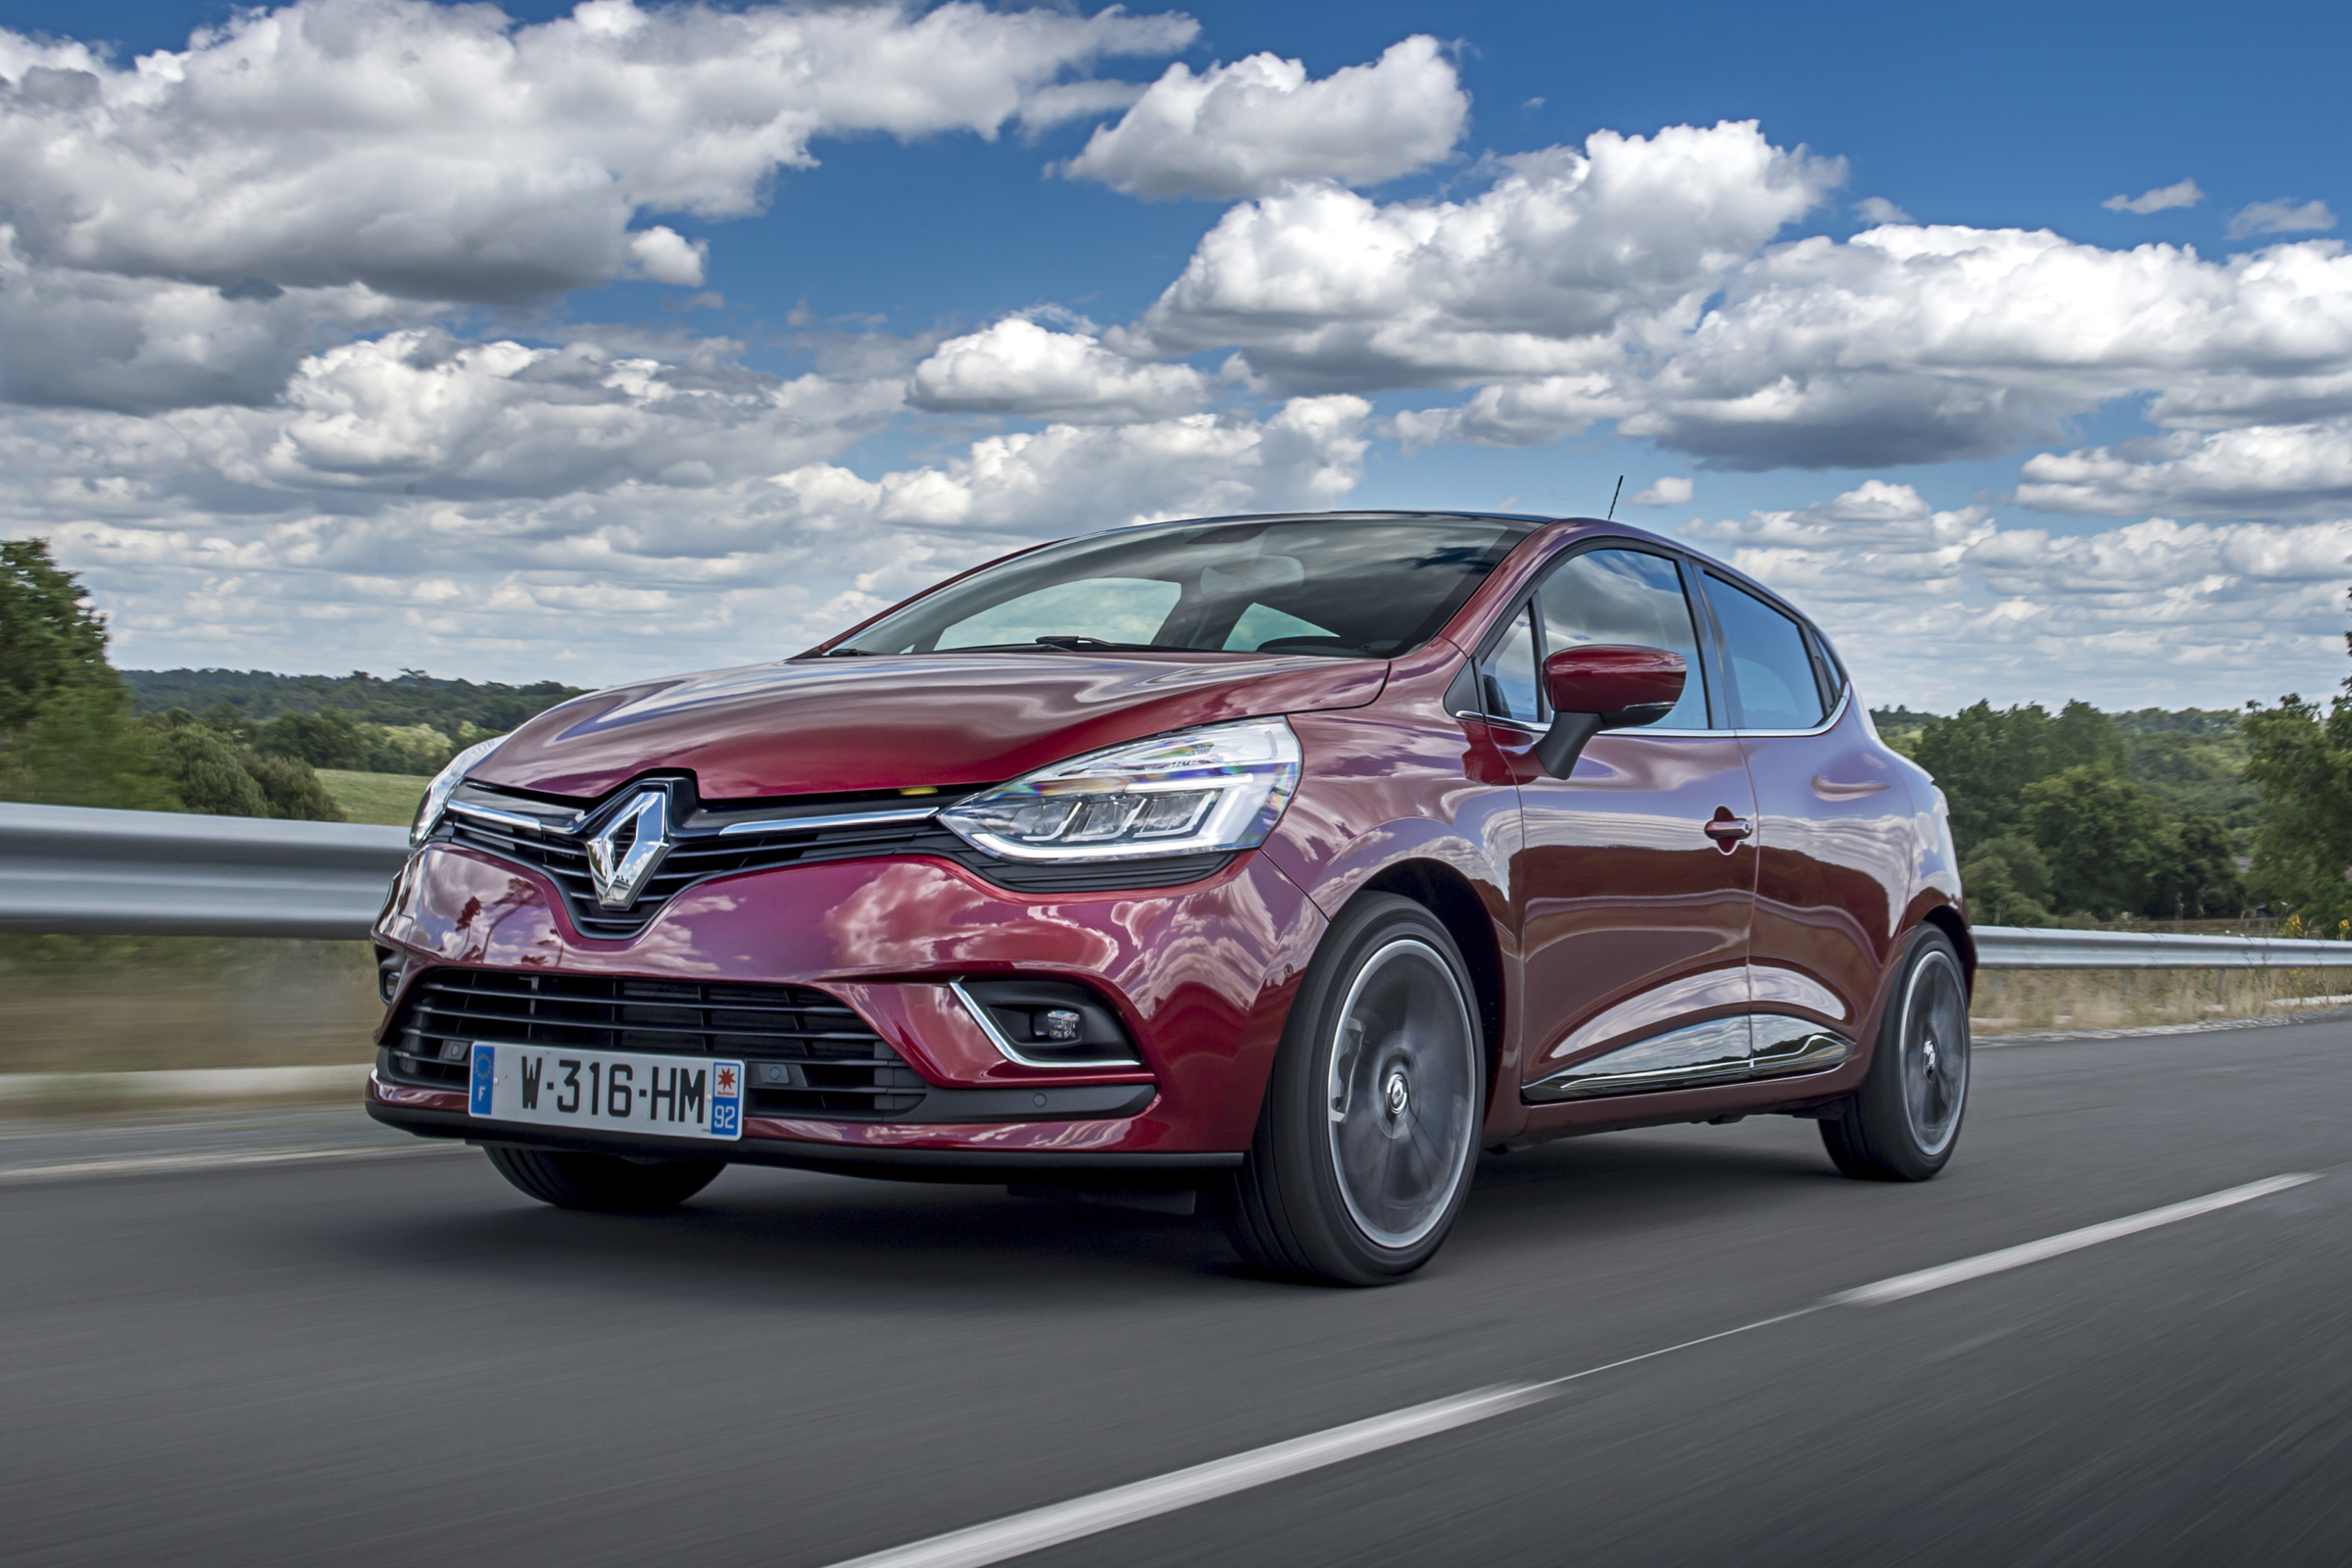 WIN a Renault Clio for 6 months Auto Express